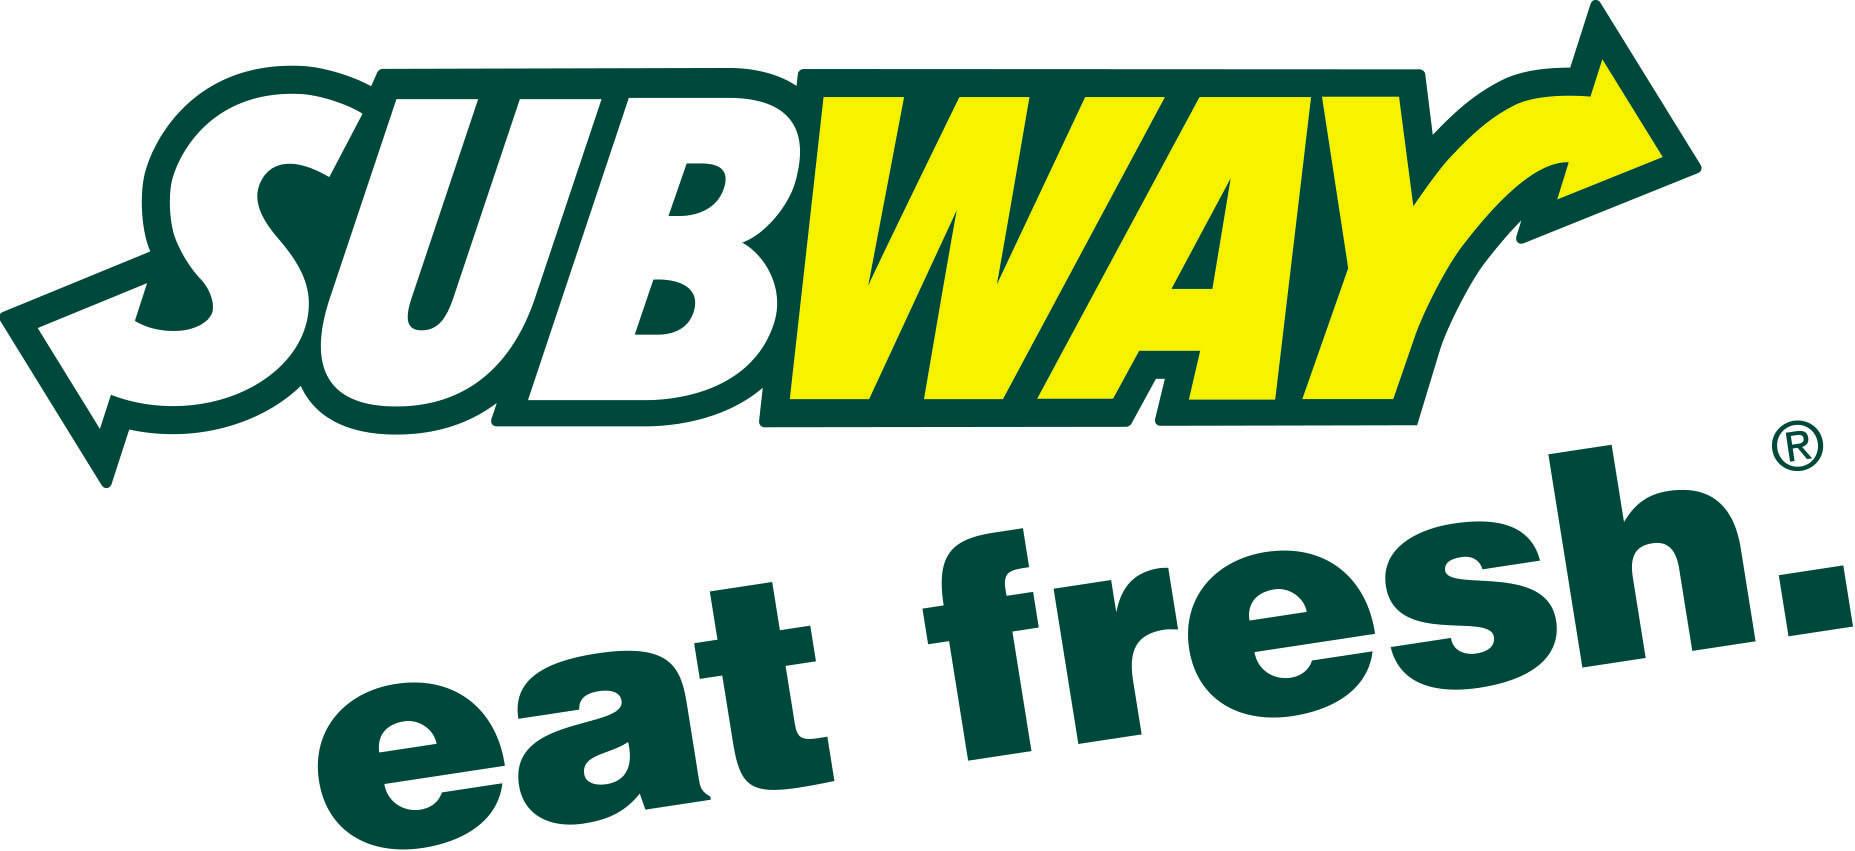 Subway Aims To Increase Number Of Franchises In Hungary To Over 100